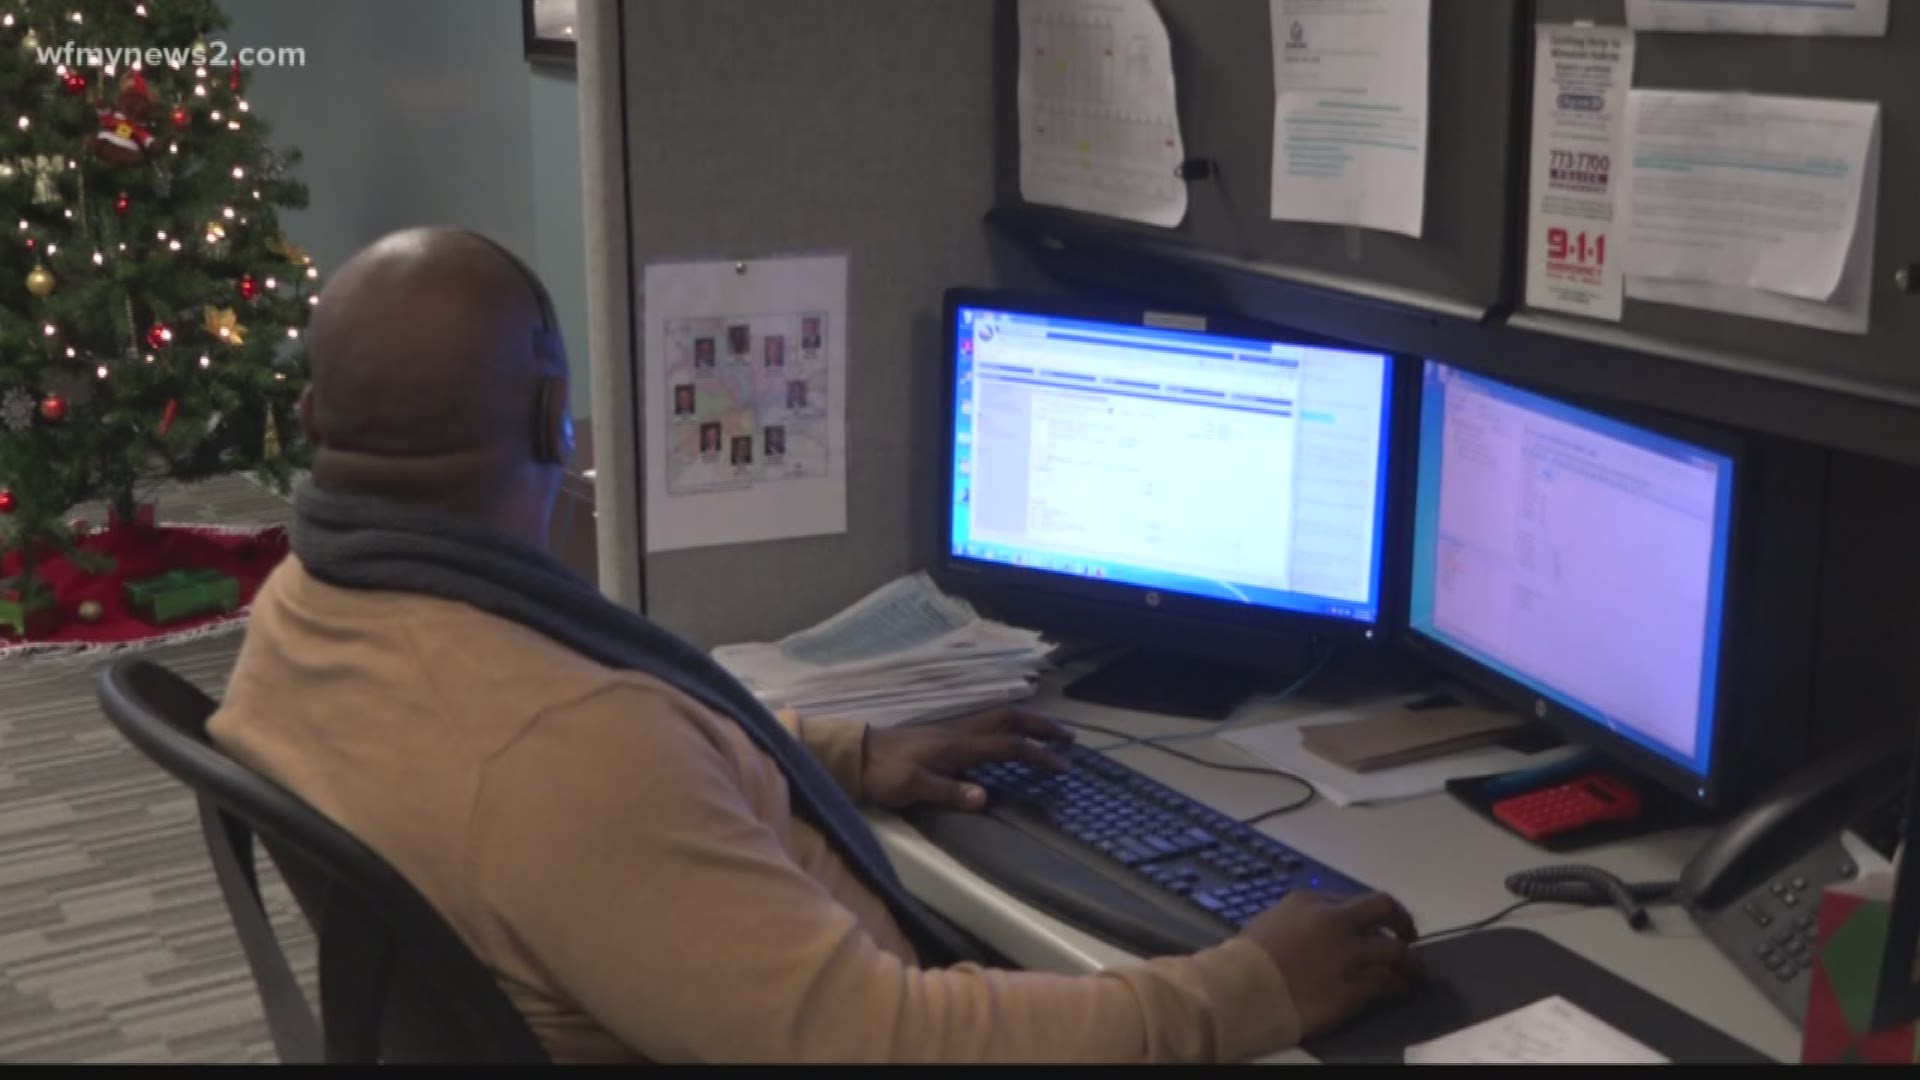 On a normal work day, staff at Winston-Salem's City Link are taking mostly calls about utility bills and trash collection. But this week it's been about snow and safety.